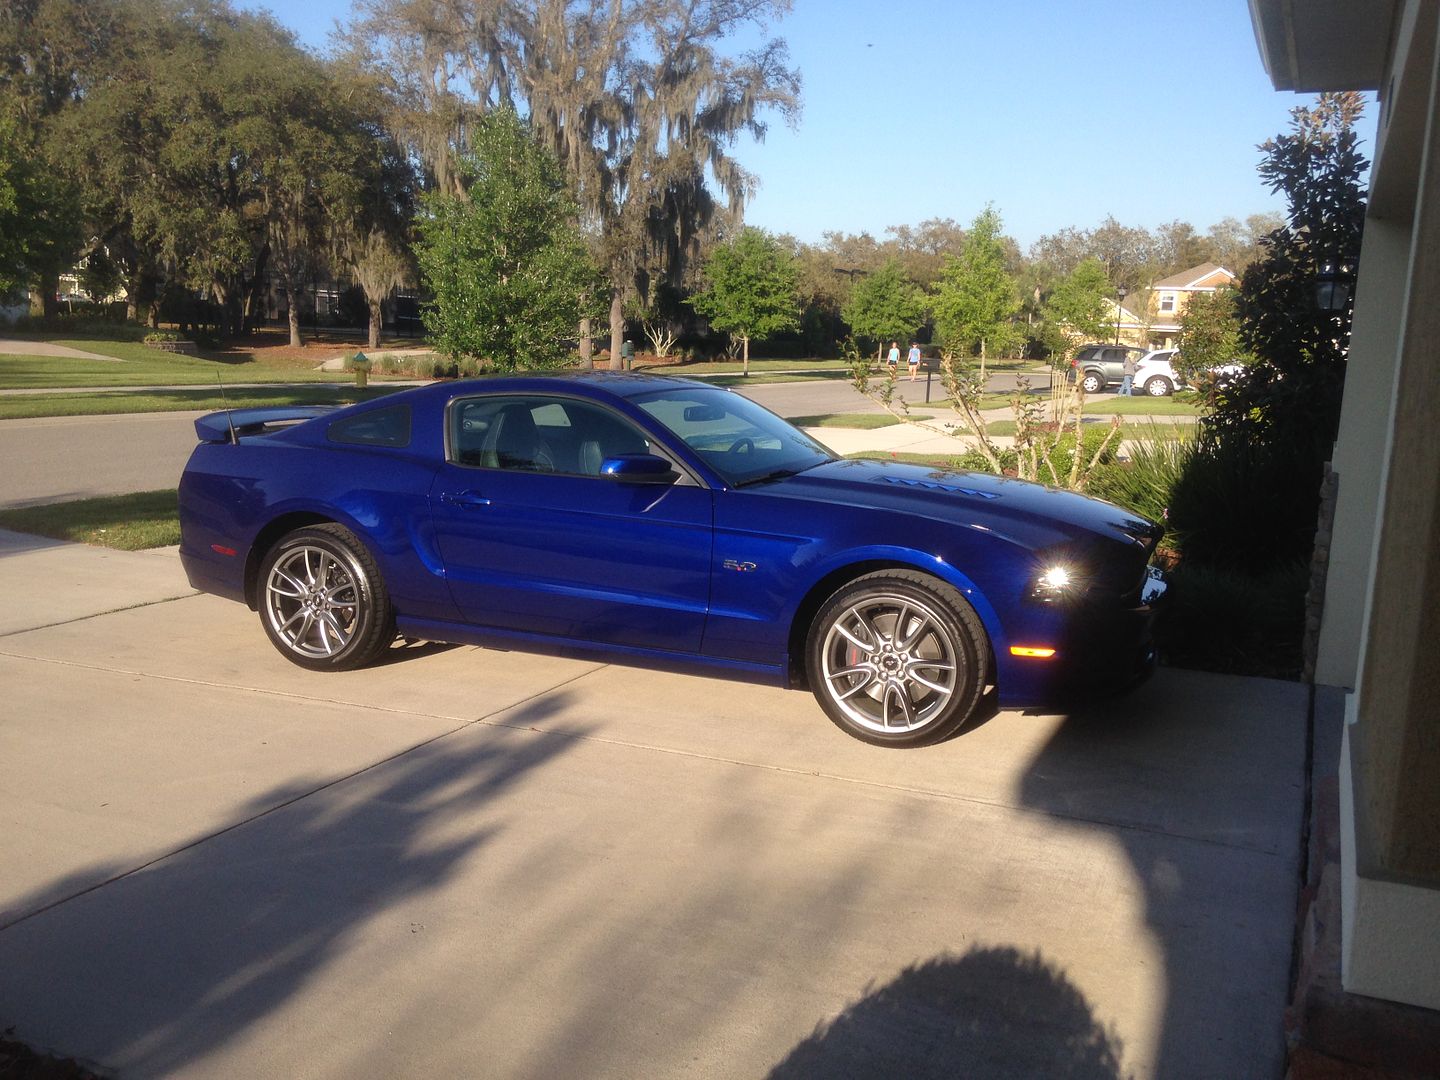 S650 Mustang Post Pictures of Your Car {filename}